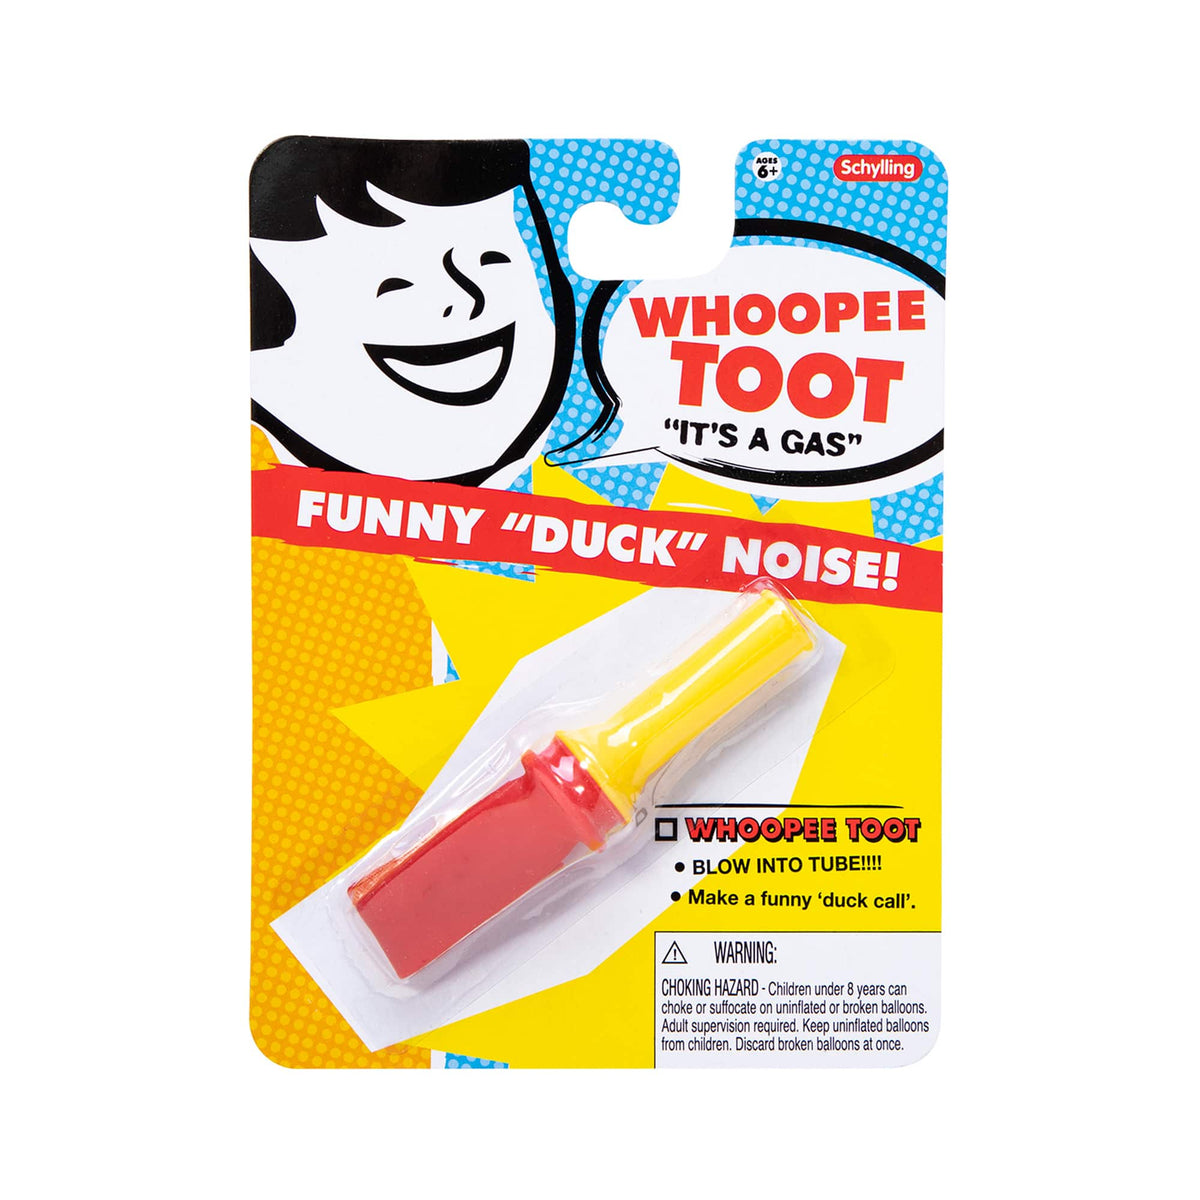 Front view of the whoopee toot from the Joke Box.